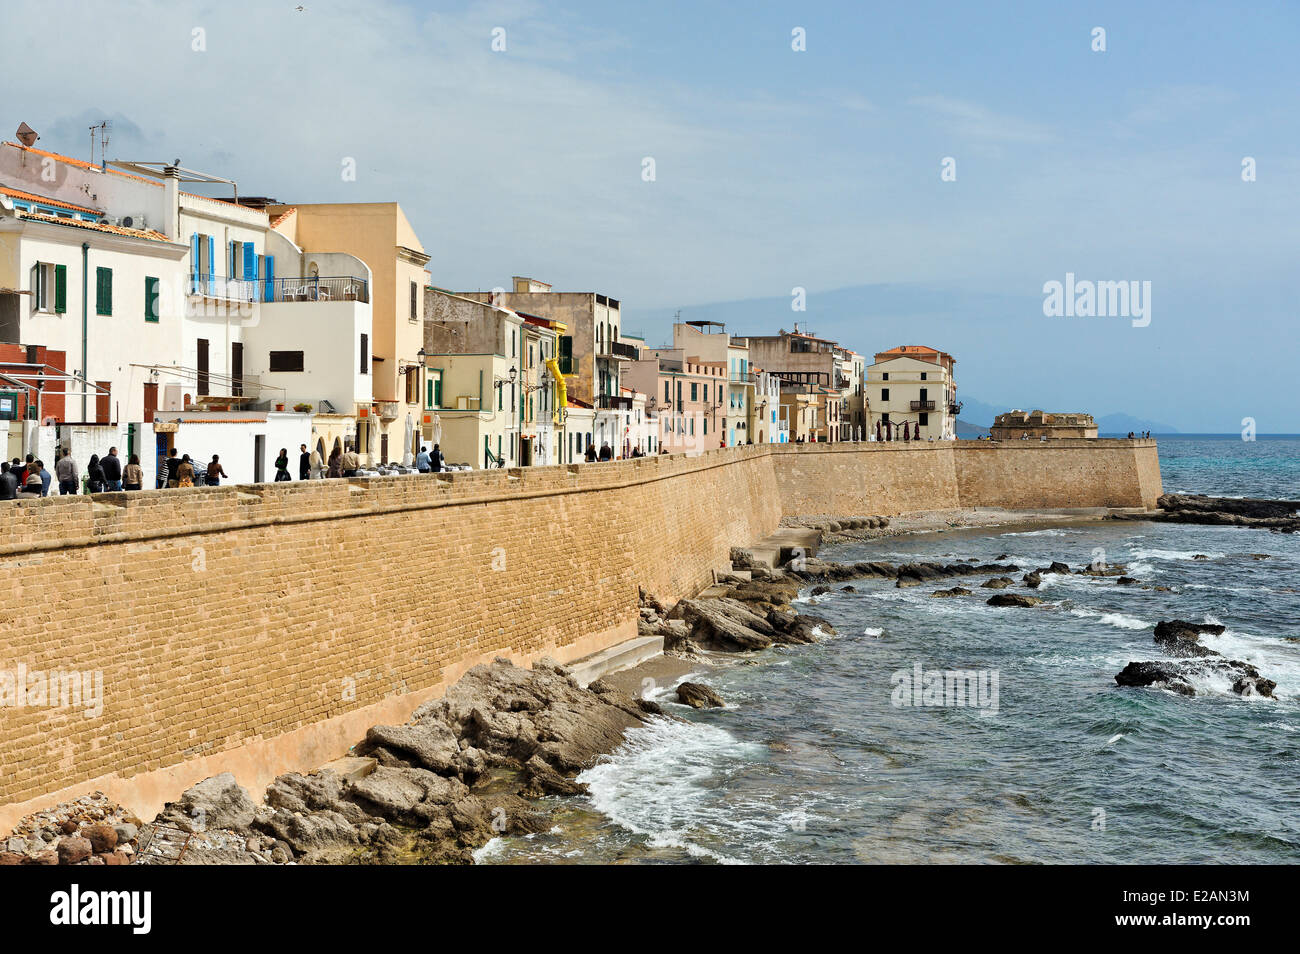 Italy, Sardinia, Sassari Province, Alghero, Marco Polo Defensive Shield, wall built in the 16h century by the catalans on the Stock Photo